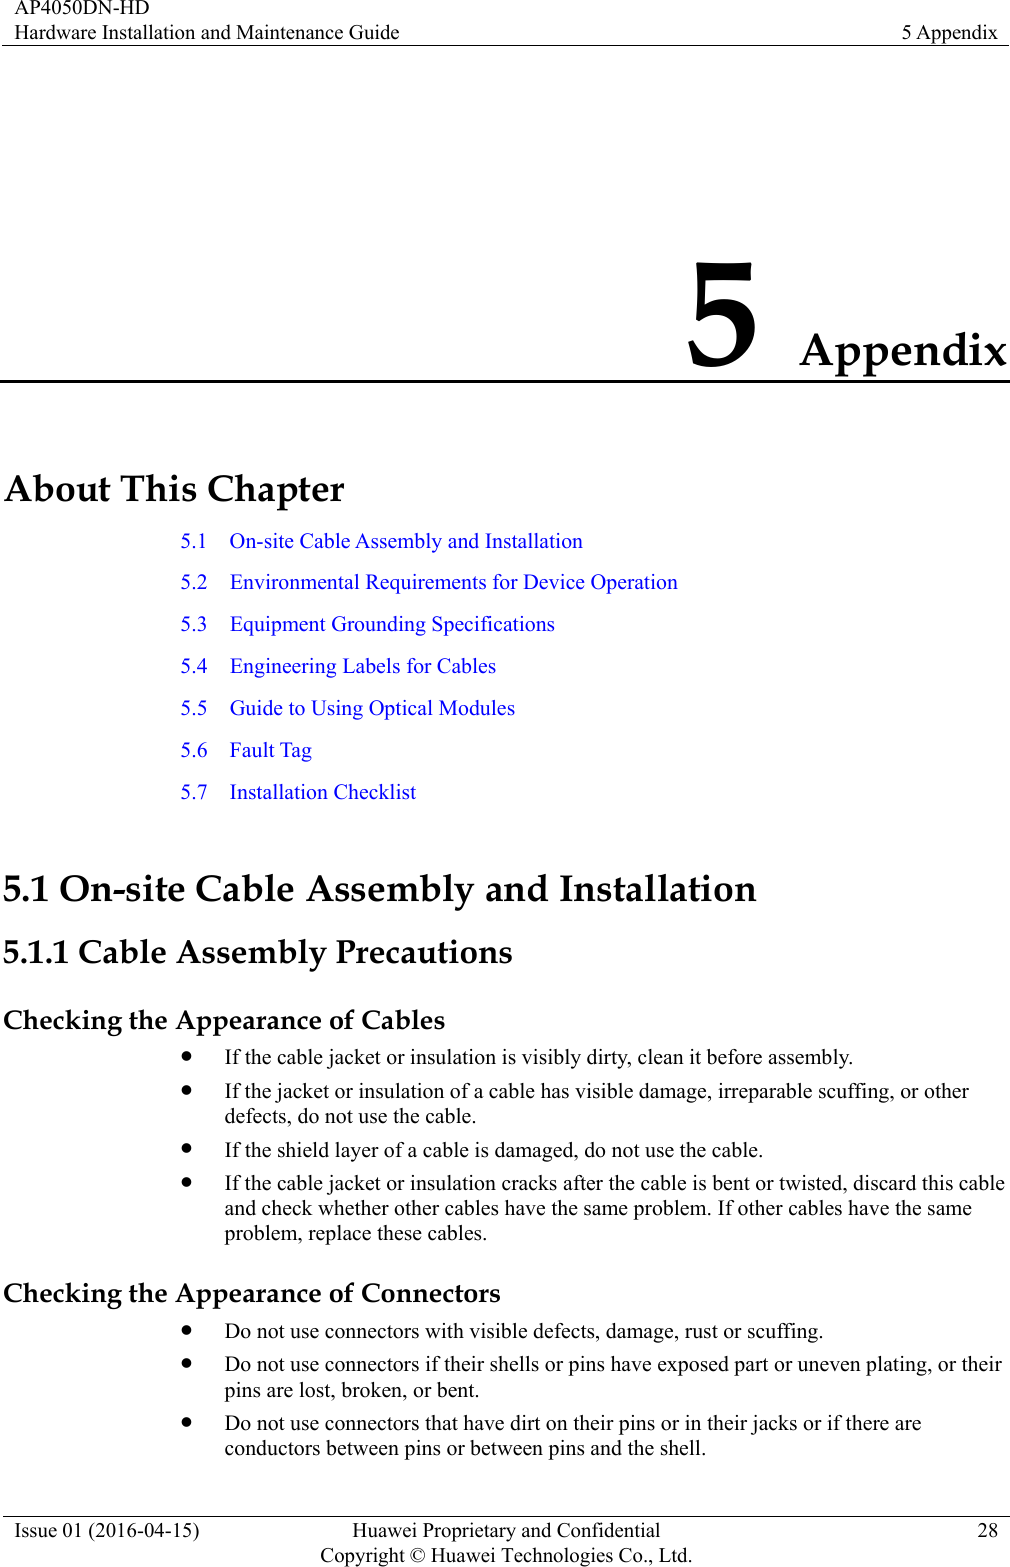 AP4050DN-HD Hardware Installation and Maintenance Guide  5 Appendix Issue 01 (2016-04-15)  Huawei Proprietary and Confidential         Copyright © Huawei Technologies Co., Ltd.28 5 Appendix About This Chapter 5.1  On-site Cable Assembly and Installation 5.2    Environmental Requirements for Device Operation 5.3  Equipment Grounding Specifications 5.4    Engineering Labels for Cables 5.5    Guide to Using Optical Modules 5.6  Fault Tag 5.7  Installation Checklist 5.1 On-site Cable Assembly and Installation 5.1.1 Cable Assembly Precautions Checking the Appearance of Cables  If the cable jacket or insulation is visibly dirty, clean it before assembly.  If the jacket or insulation of a cable has visible damage, irreparable scuffing, or other defects, do not use the cable.  If the shield layer of a cable is damaged, do not use the cable.  If the cable jacket or insulation cracks after the cable is bent or twisted, discard this cable and check whether other cables have the same problem. If other cables have the same problem, replace these cables. Checking the Appearance of Connectors  Do not use connectors with visible defects, damage, rust or scuffing.  Do not use connectors if their shells or pins have exposed part or uneven plating, or their pins are lost, broken, or bent.  Do not use connectors that have dirt on their pins or in their jacks or if there are conductors between pins or between pins and the shell. 